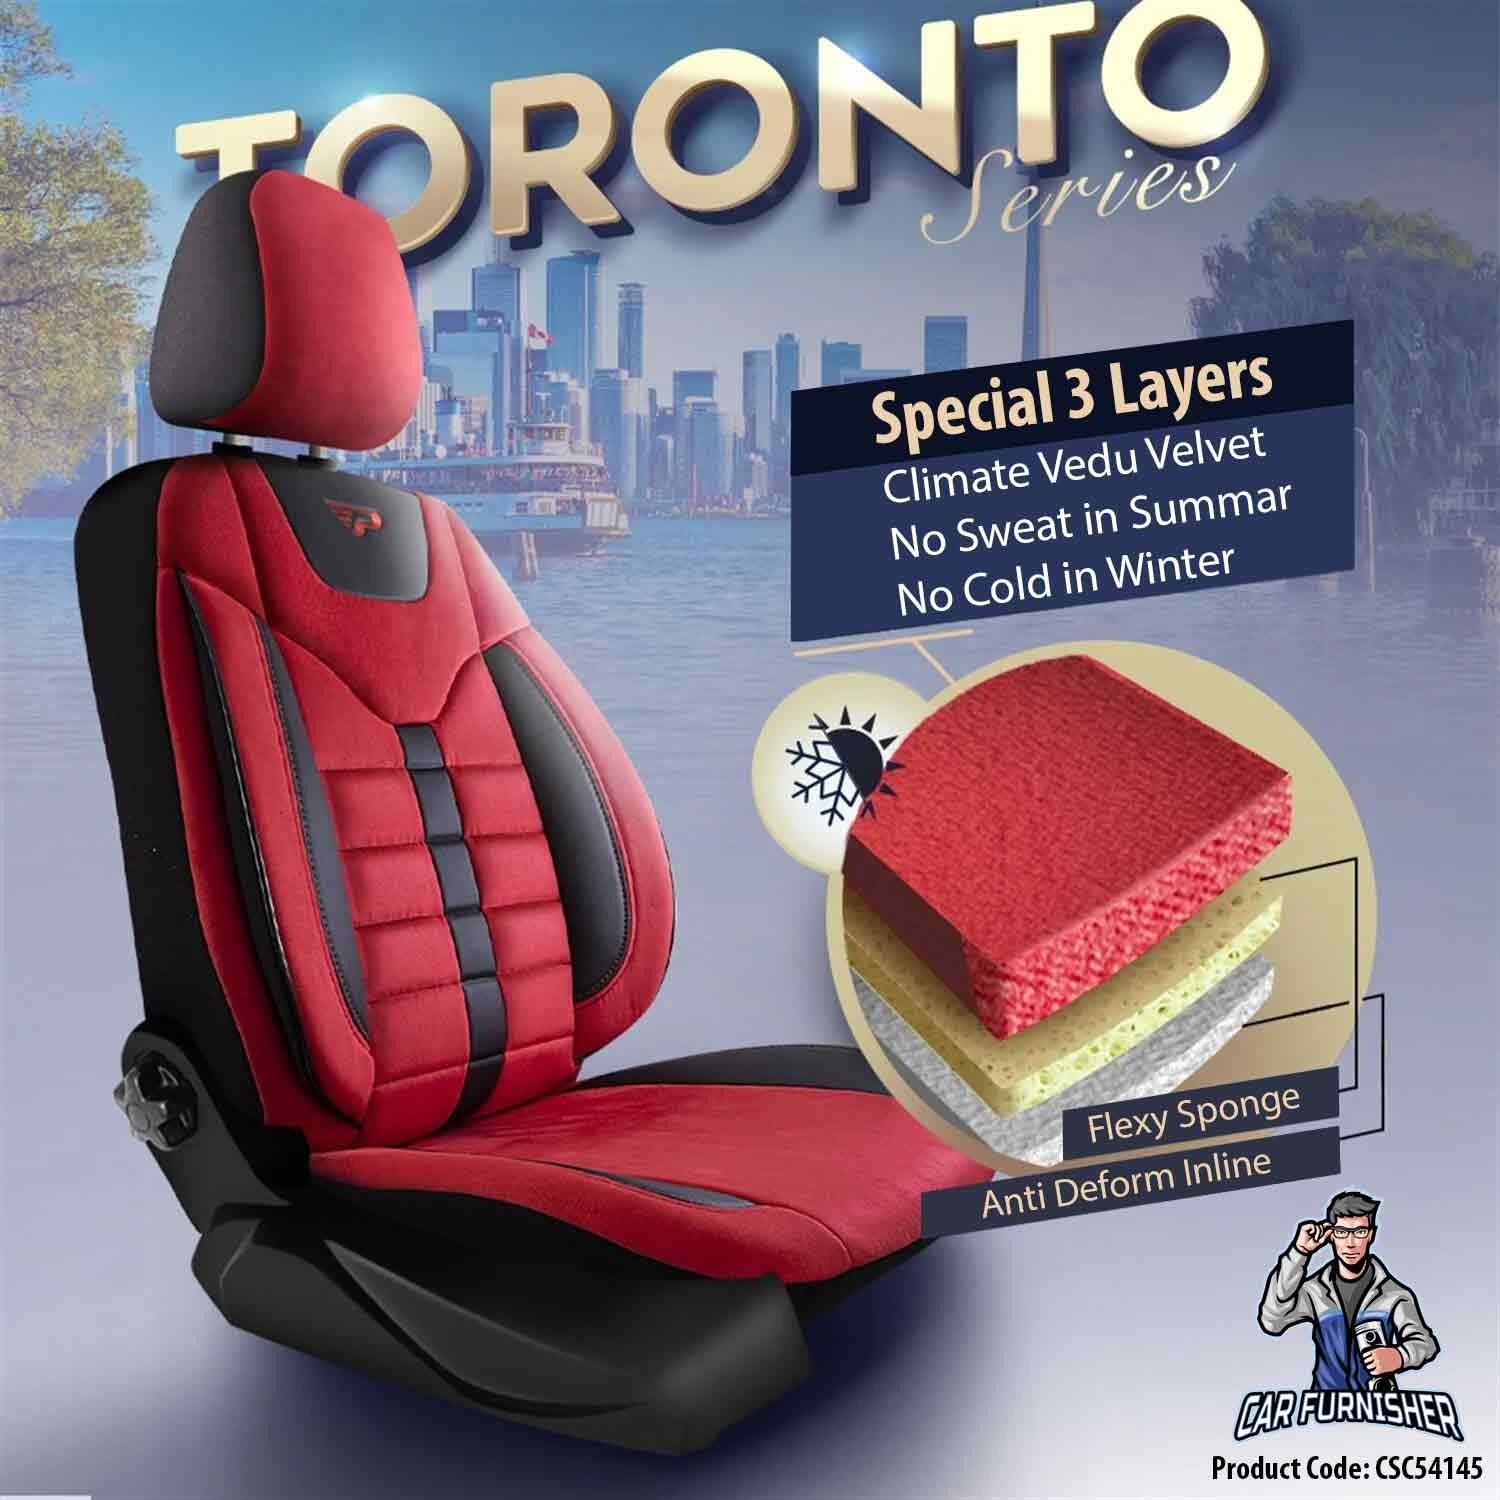 Mercedes 190 Seat Covers Toronto Design Red 5 Seats + Headrests (Full Set) Leather & Suede Fabric